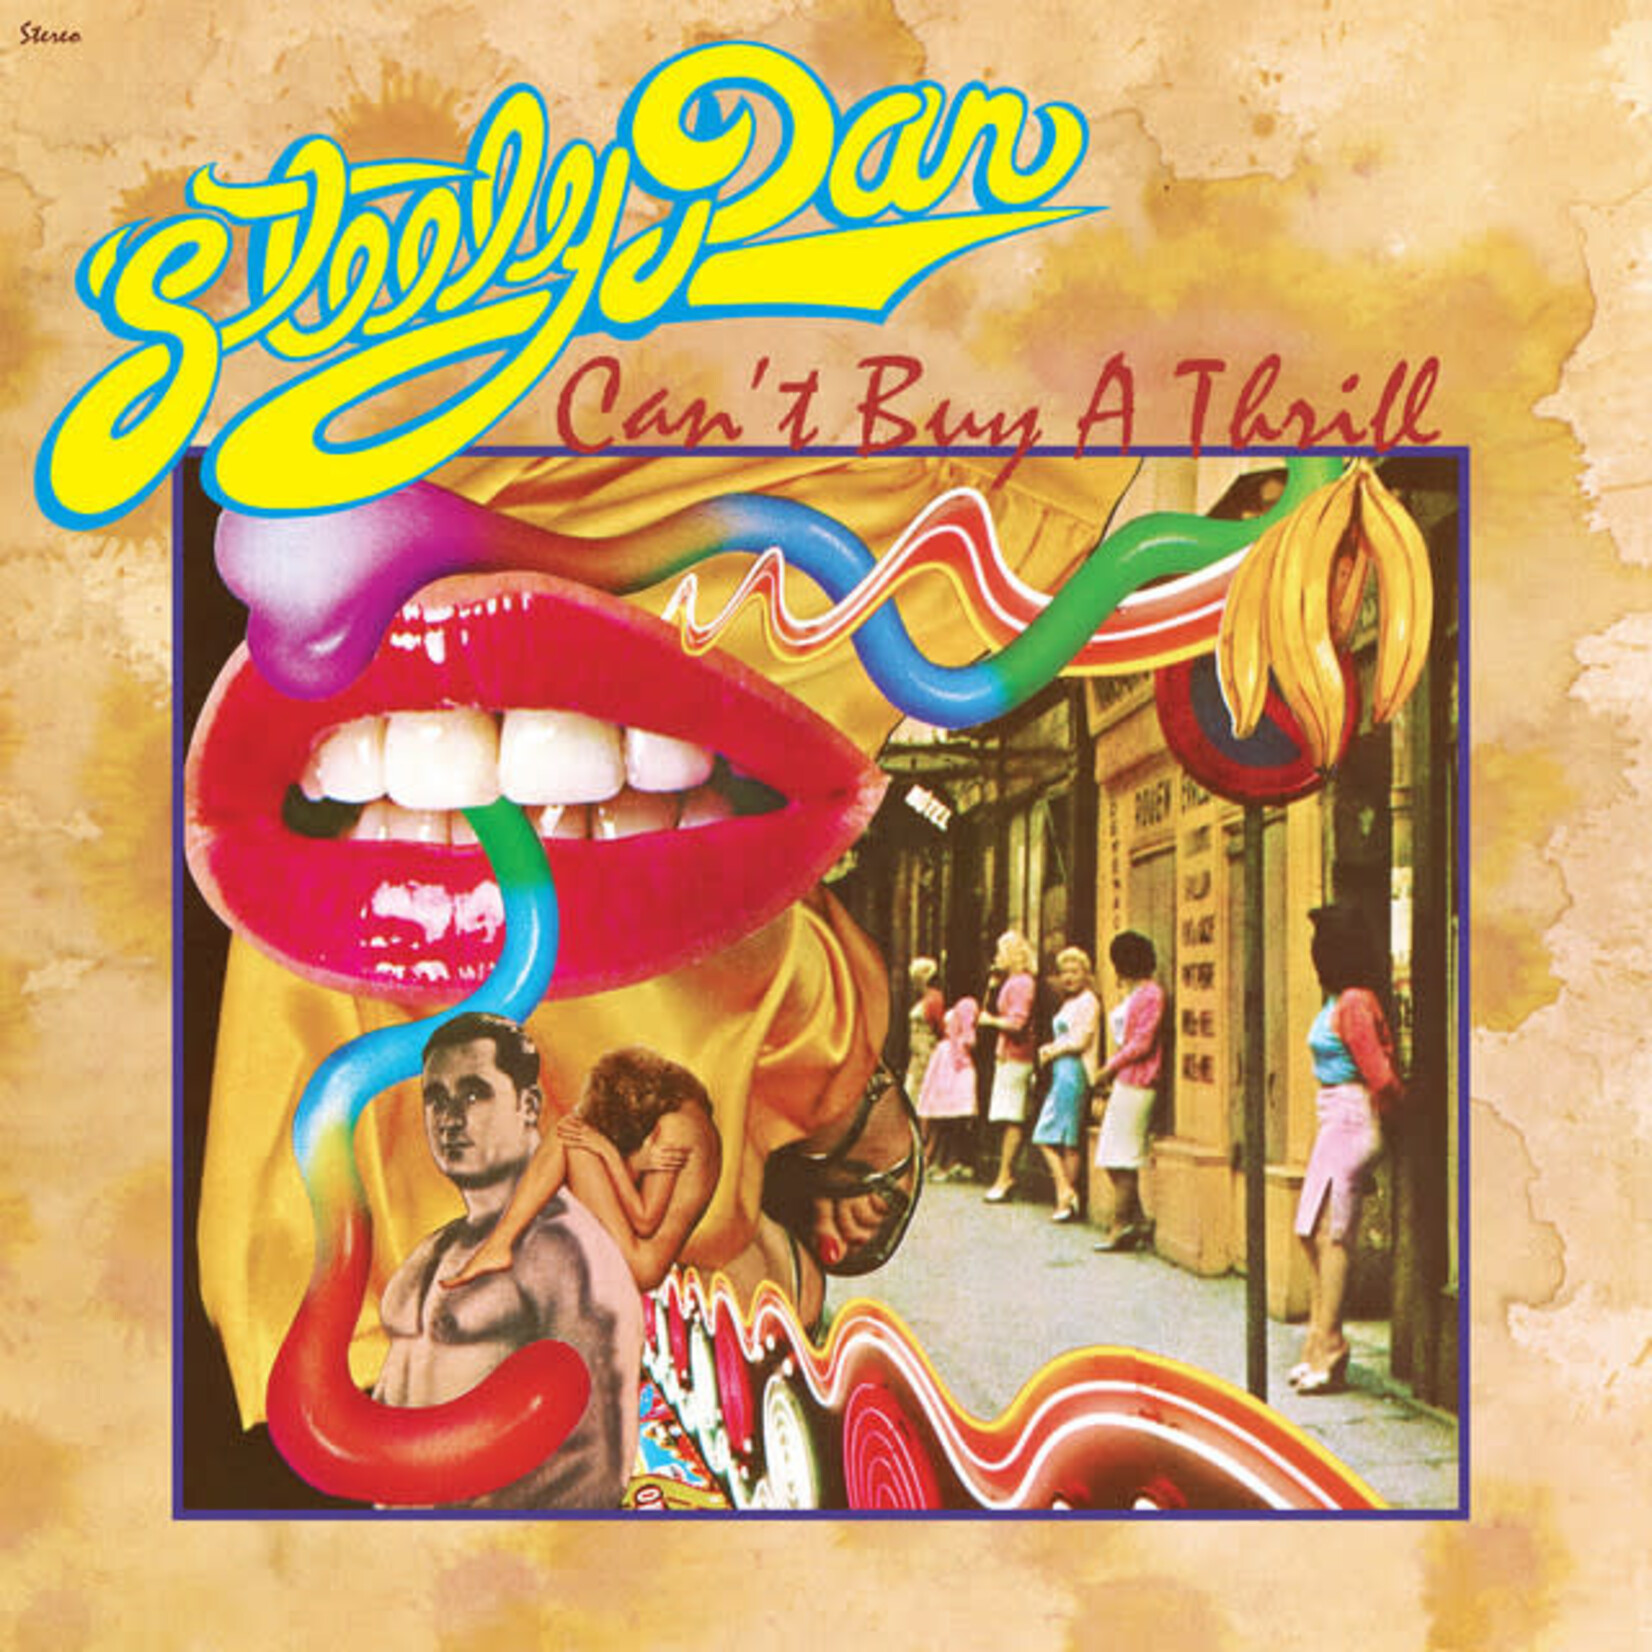 Steely Dan - Can't Buy A Thrill [CD]